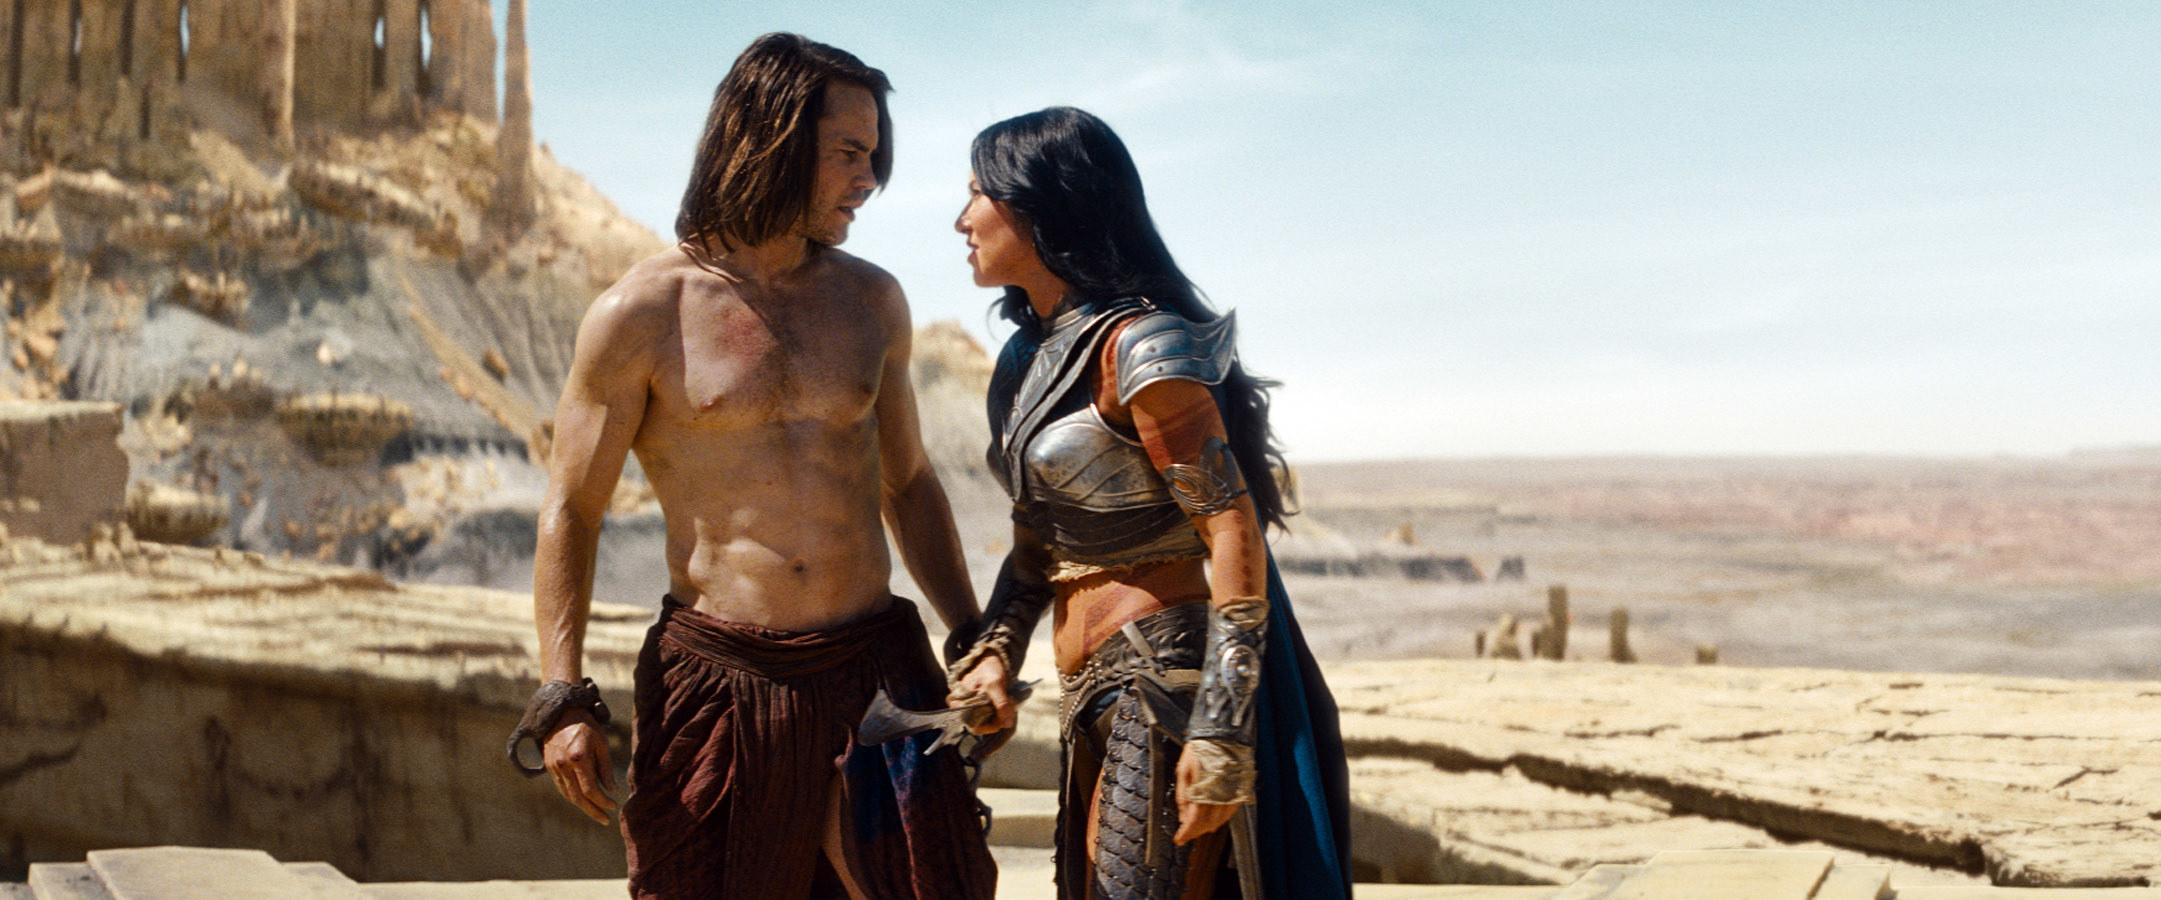 Taylor Kitsch, Lynn Collins standing on a desert planet out in space, holding hands